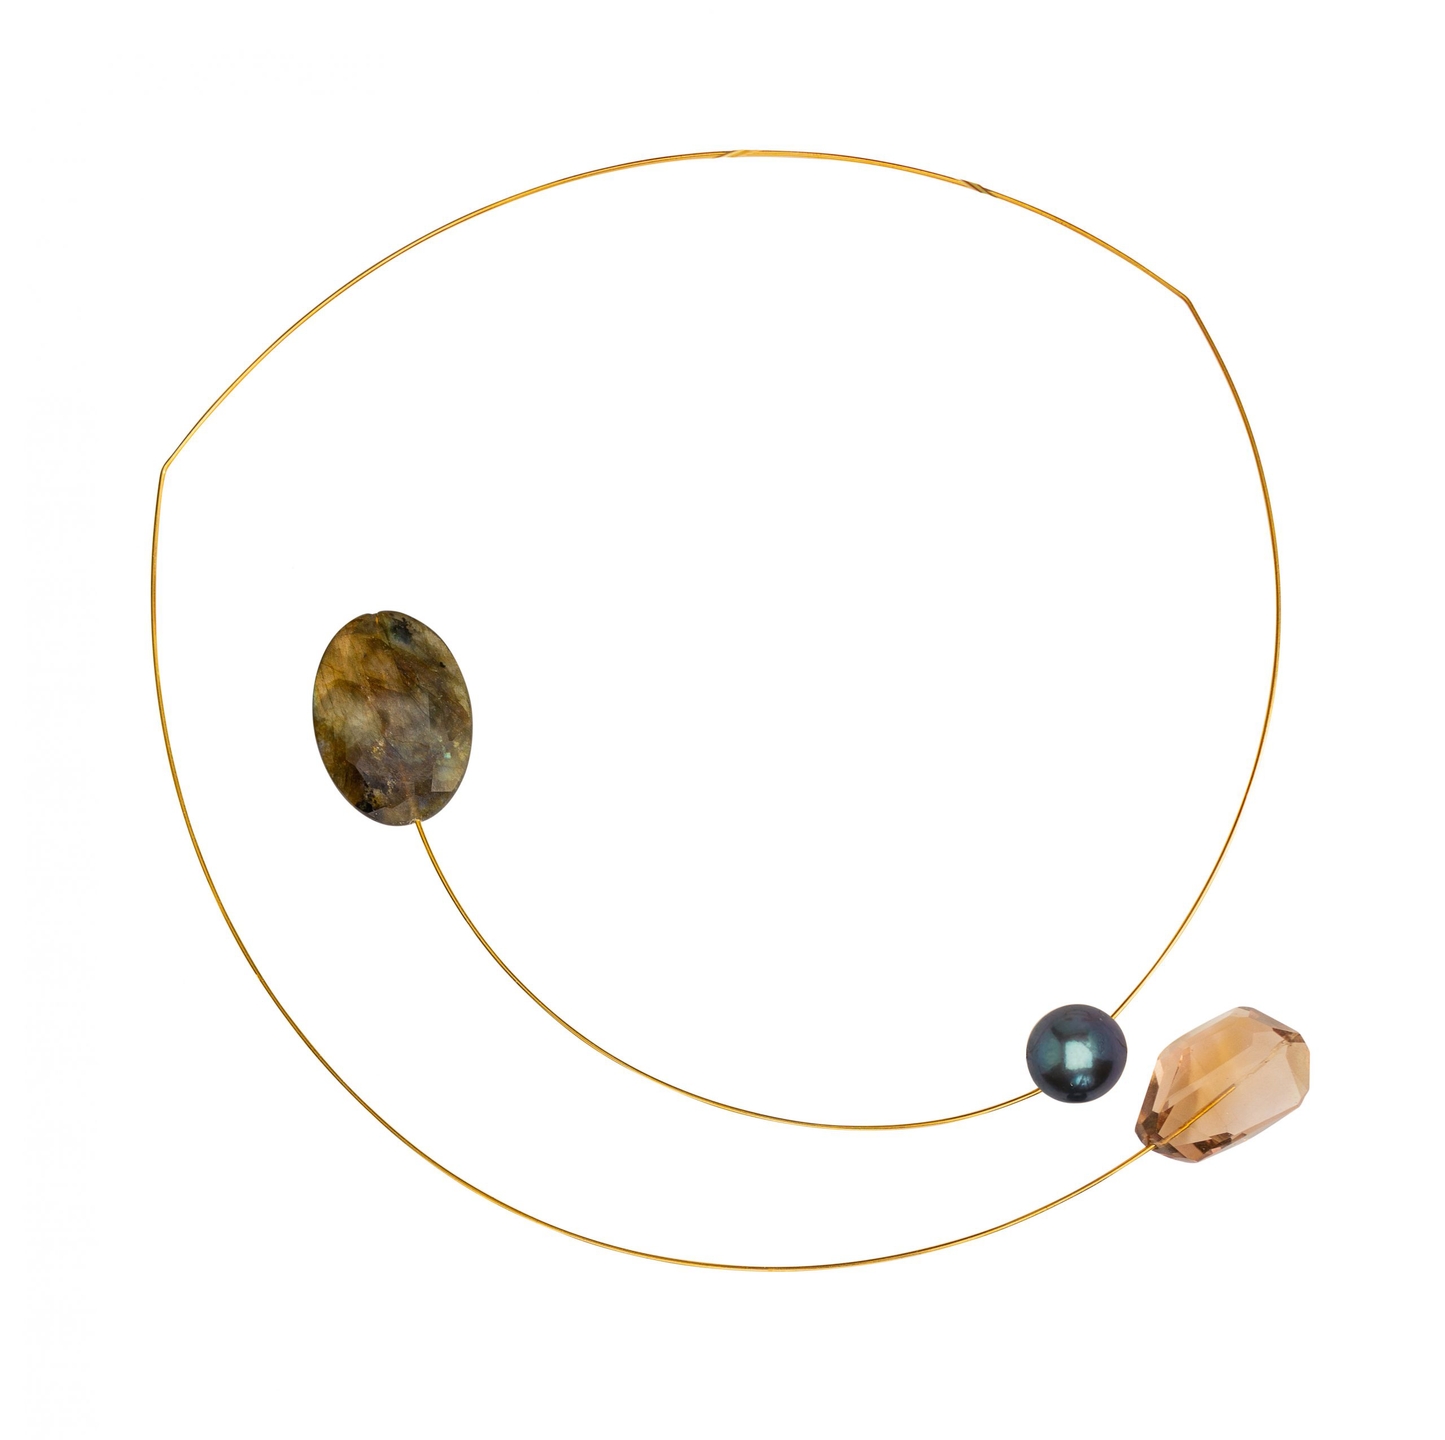 Asymmetric Necklace with Gemstone and Freshwater Pearl options